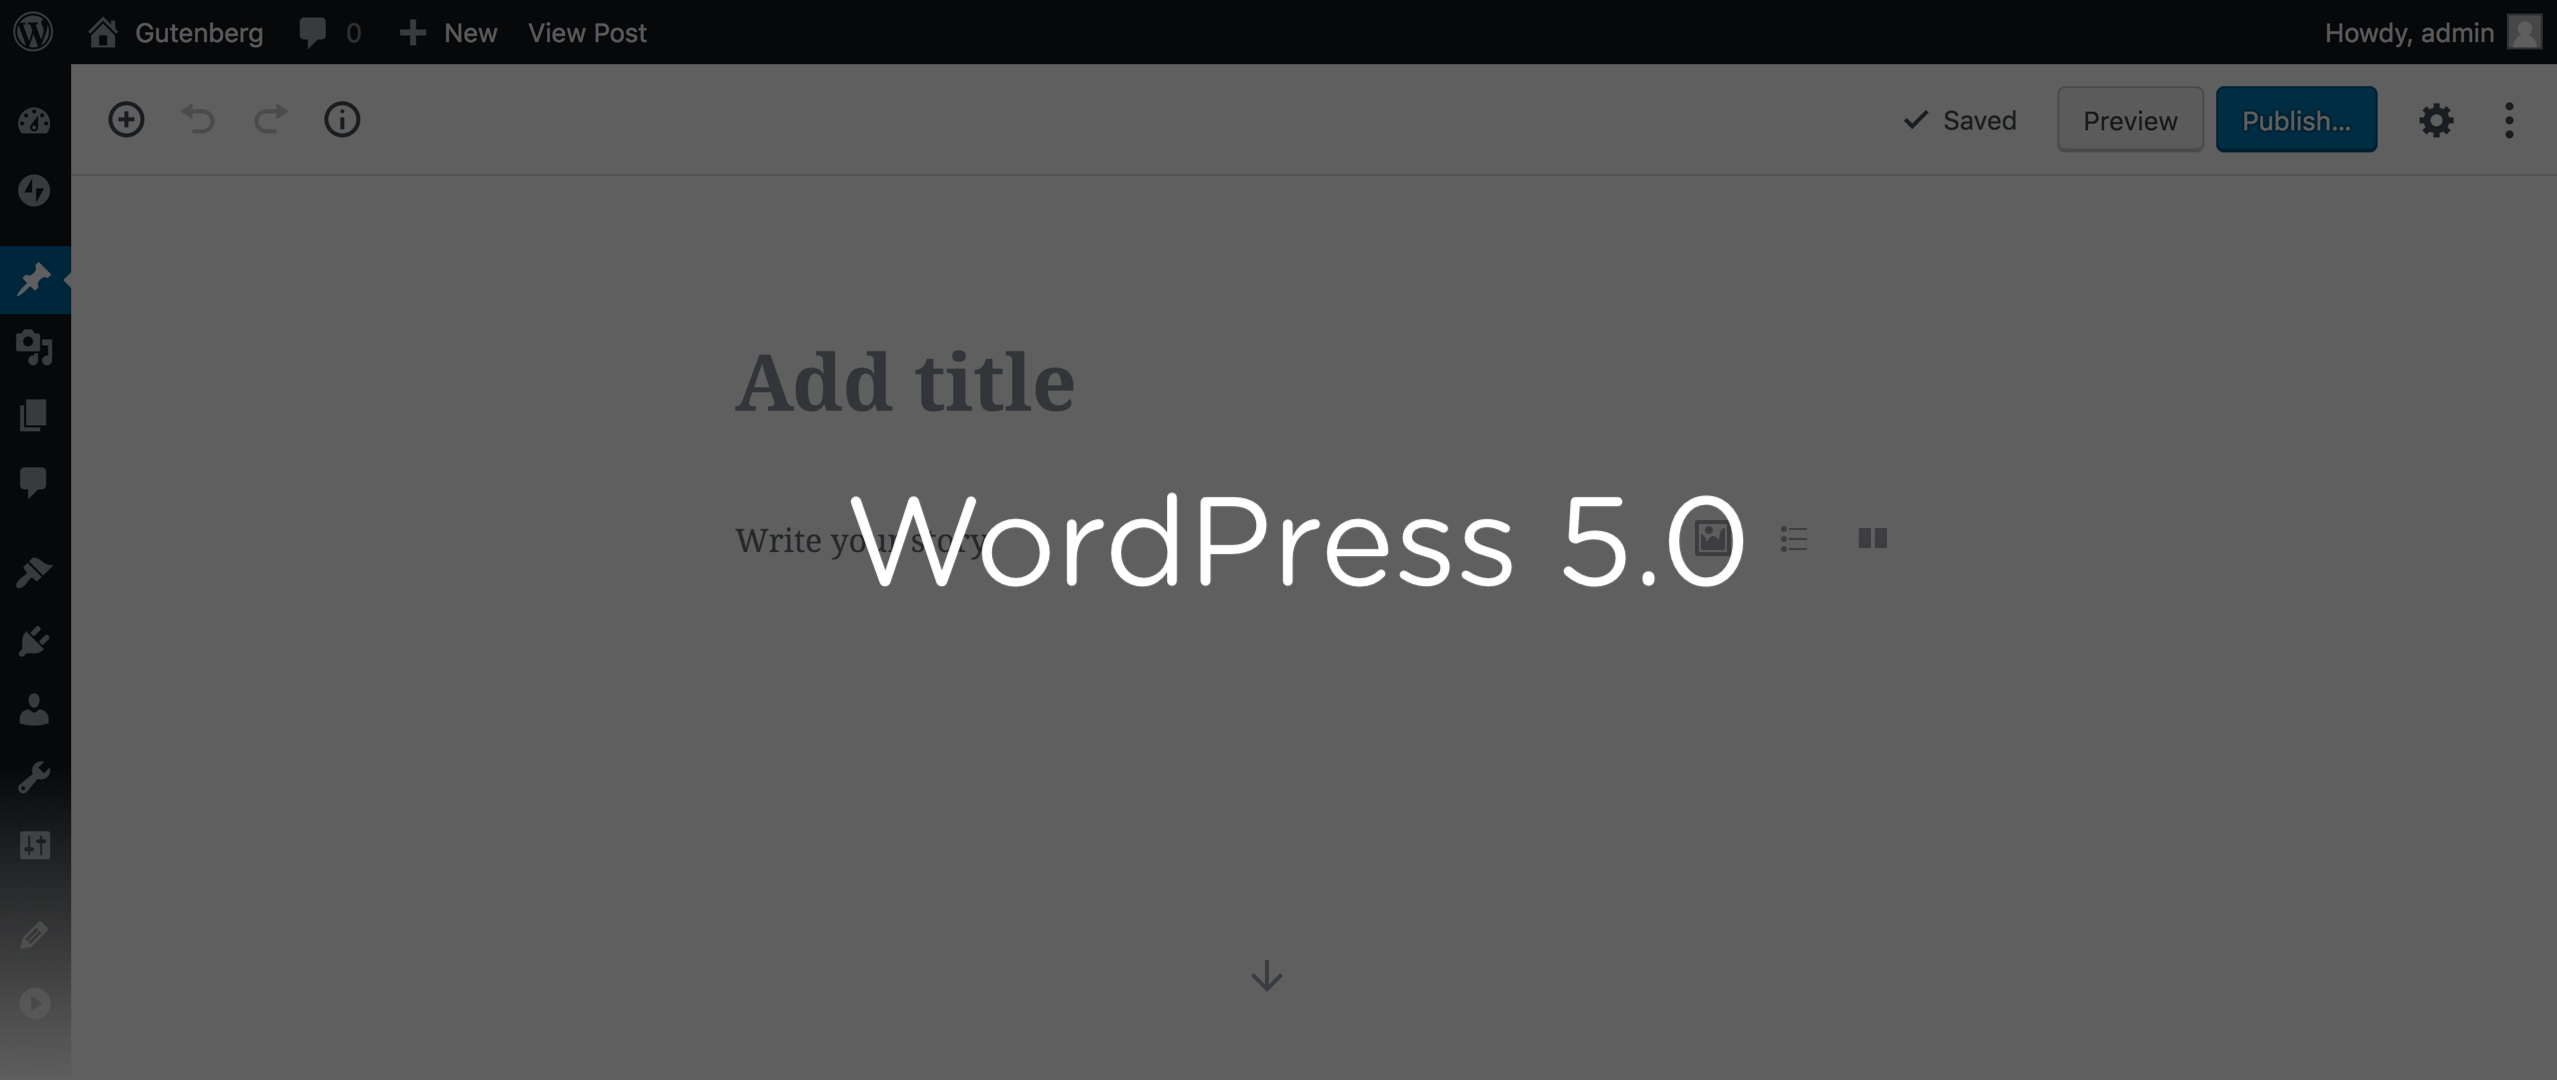 WordPress 5.0 marks a new era for the world’s most popular CMS